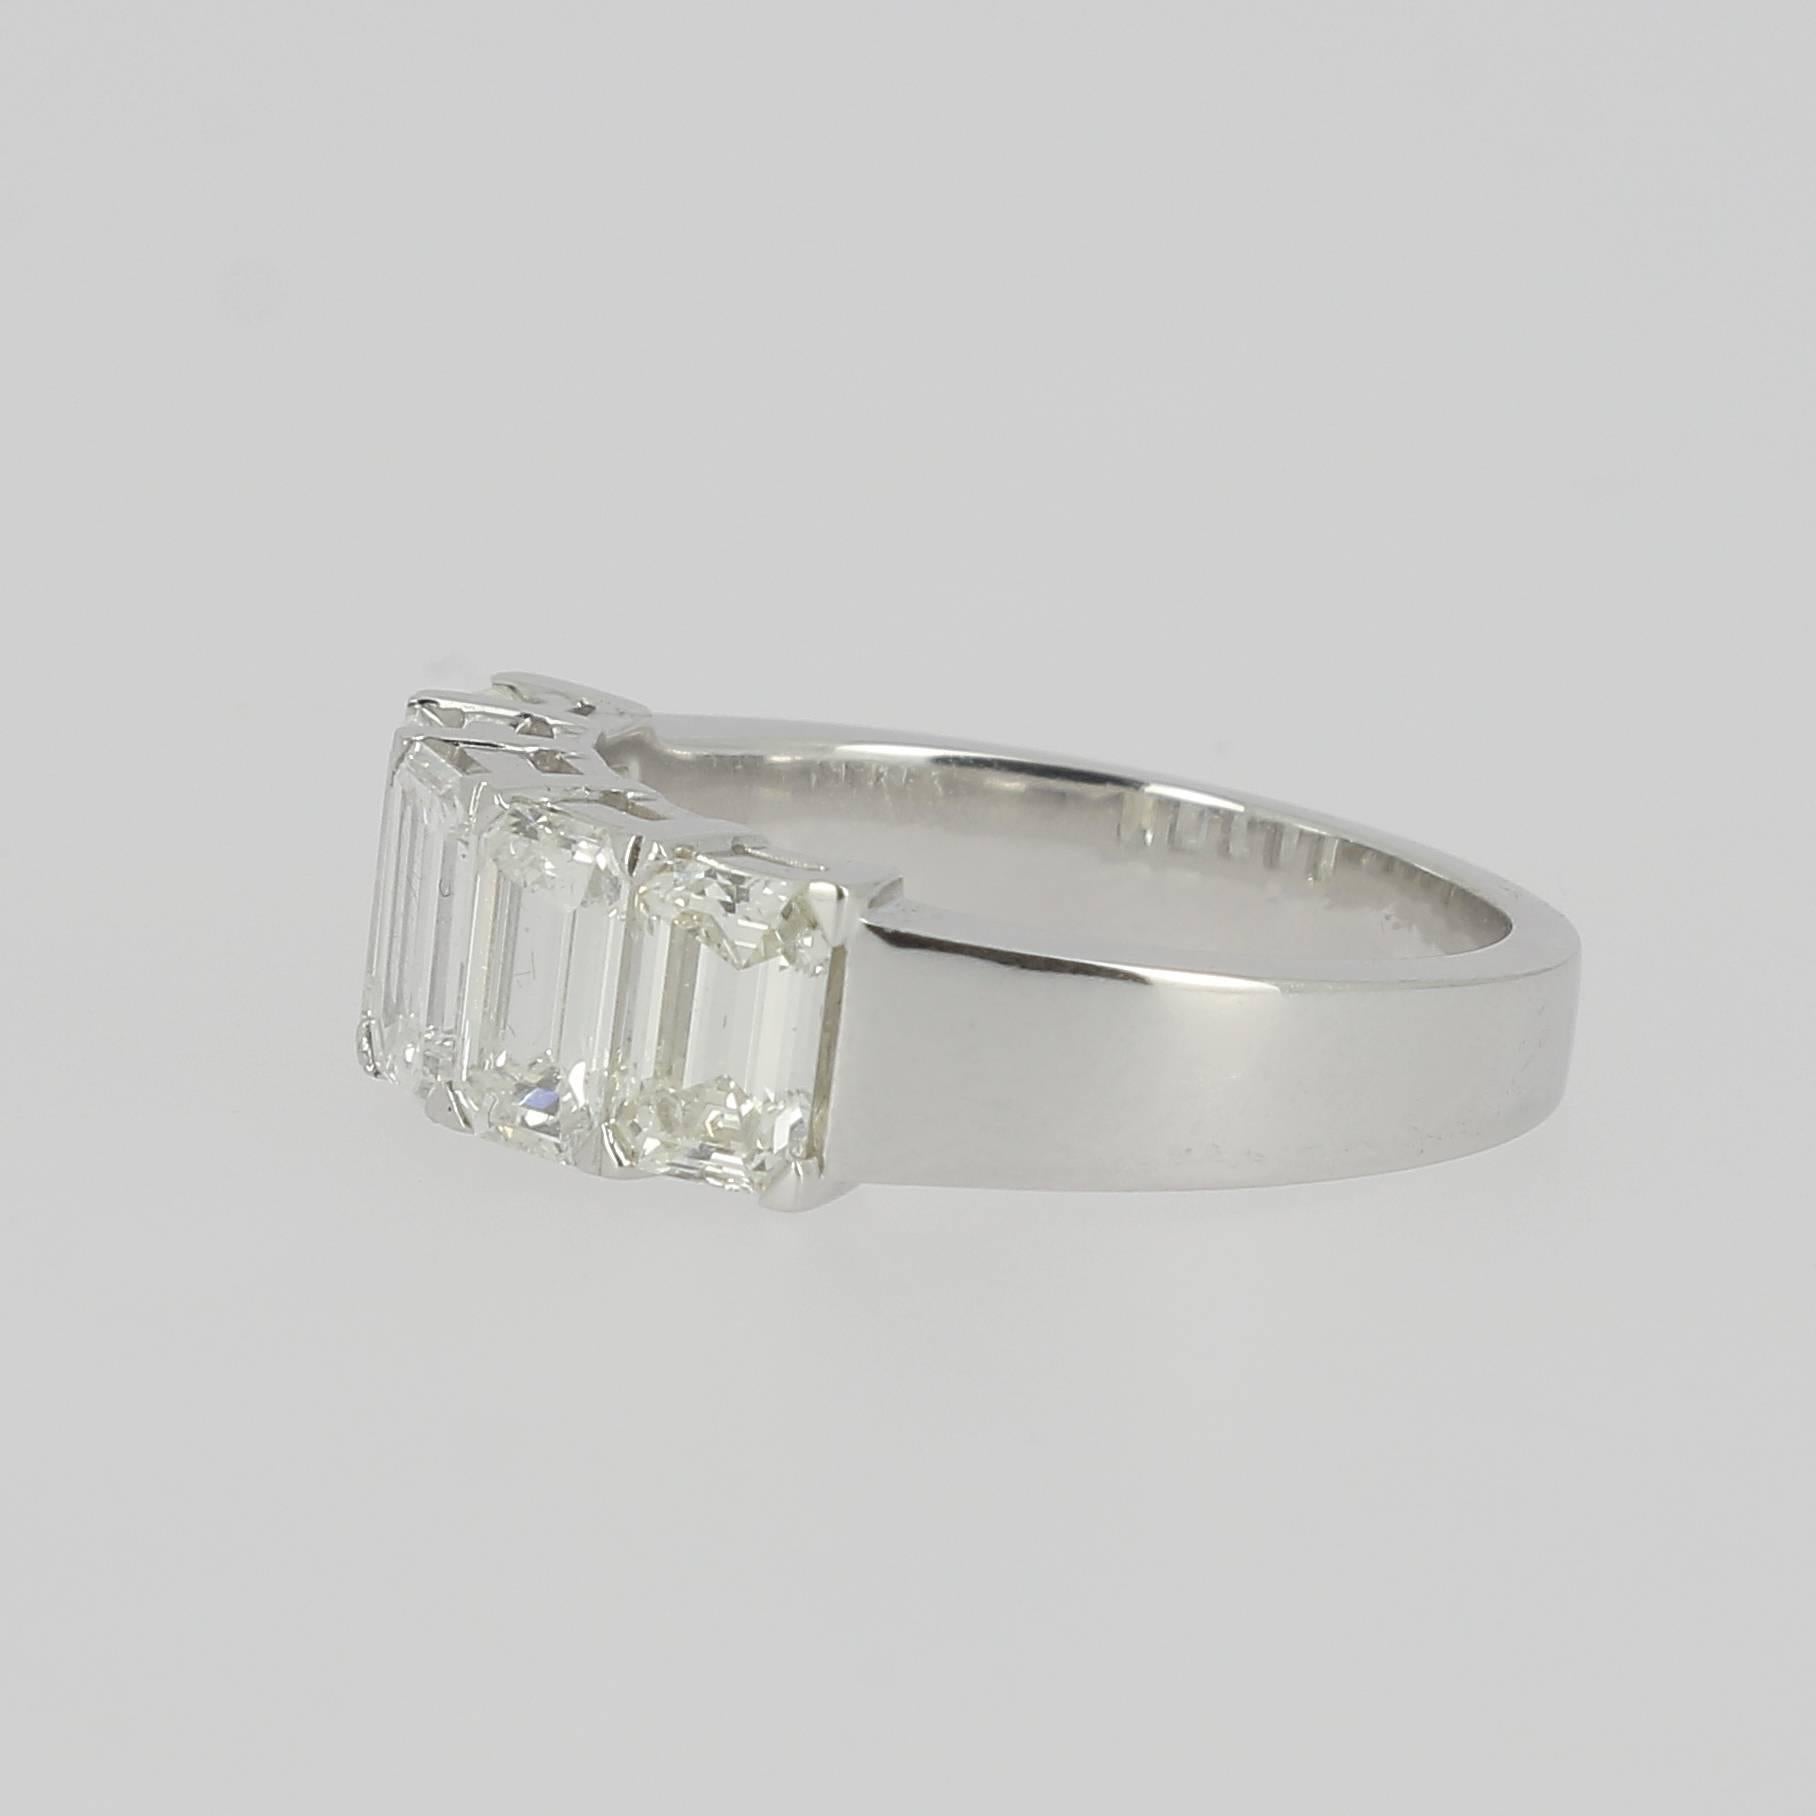 A fine and impressive 2.71 carat Emerald Cut Diamond Ring.
The Engagement ring is set with 5 stones, each Diamond is 0.54 Carats.
The Ring is in 18K White Gold and weight 6.45 grams.
The Size of the ring is 6 ½ US, the ring can be sized quickly.

